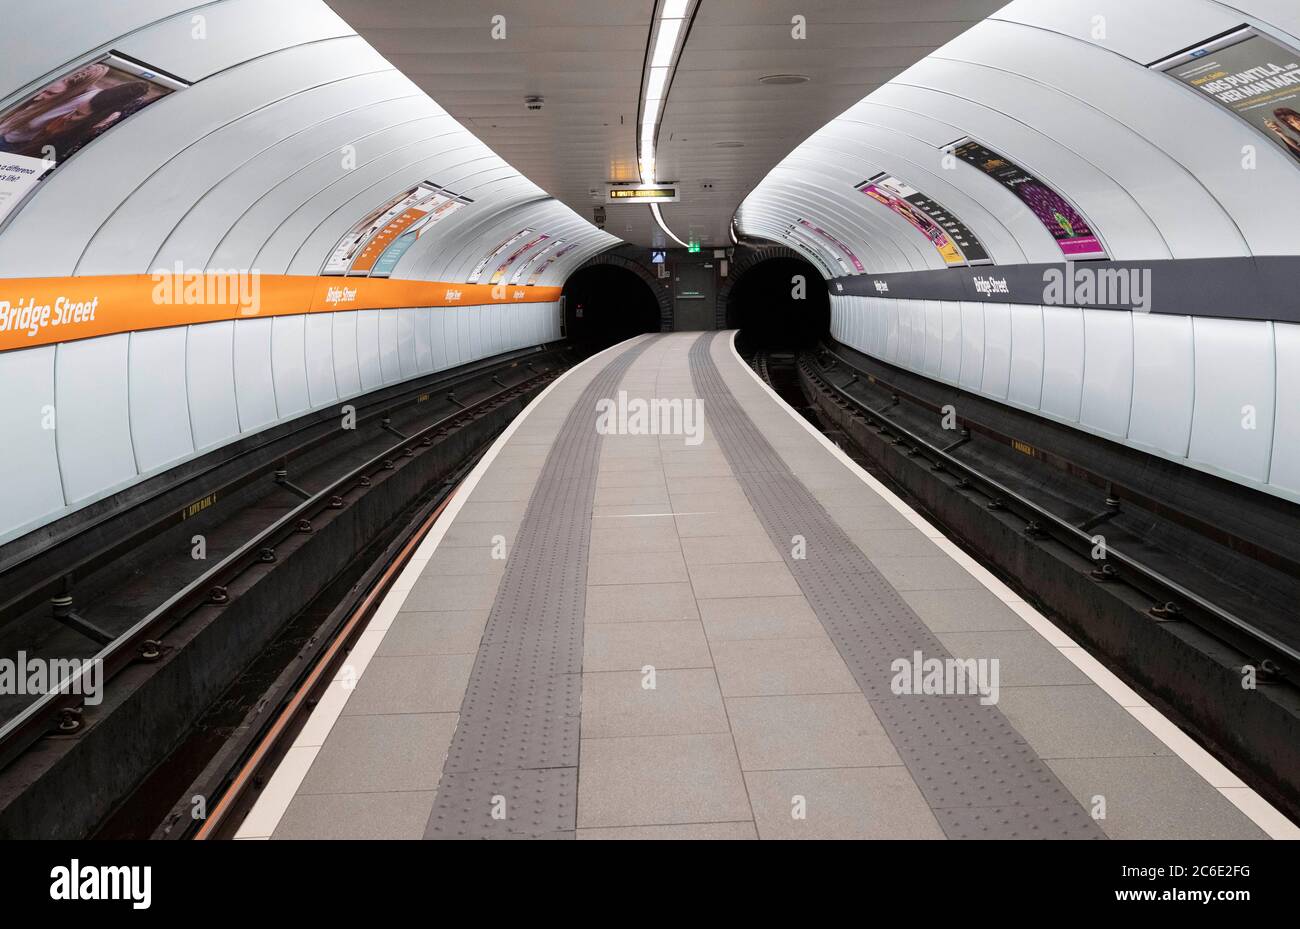 GLASGOW SUBWAY and underground set for closure as passengers stay at home as Covid-19 Corona Virus spreads across the city and country. The government is set to halt and restrict travel in Scotland despite desperate efforts by Strathclyde Transport staff cleaning up.   on 19 March 2020 in Glasgow, Scotland Stock Photo